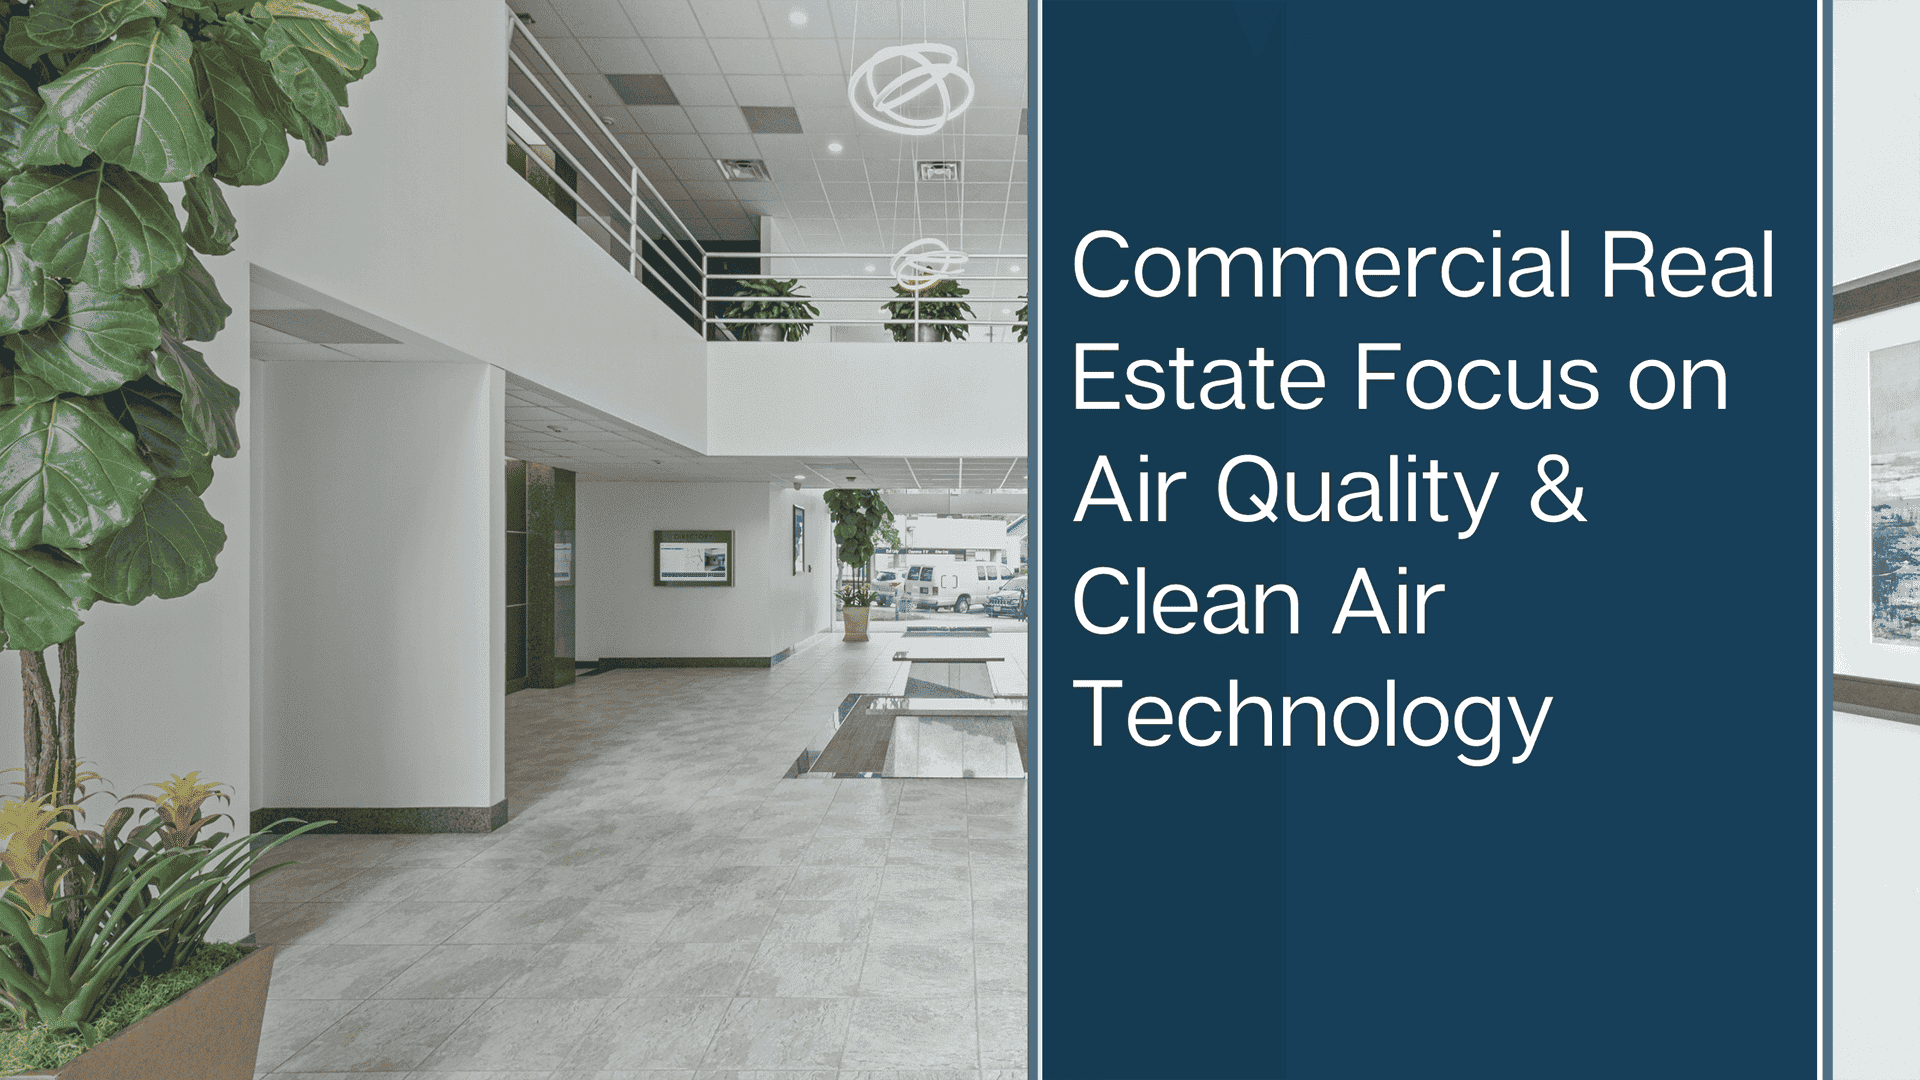 Commercial Real Estate Focus on Air Quality and Clean Air Technology